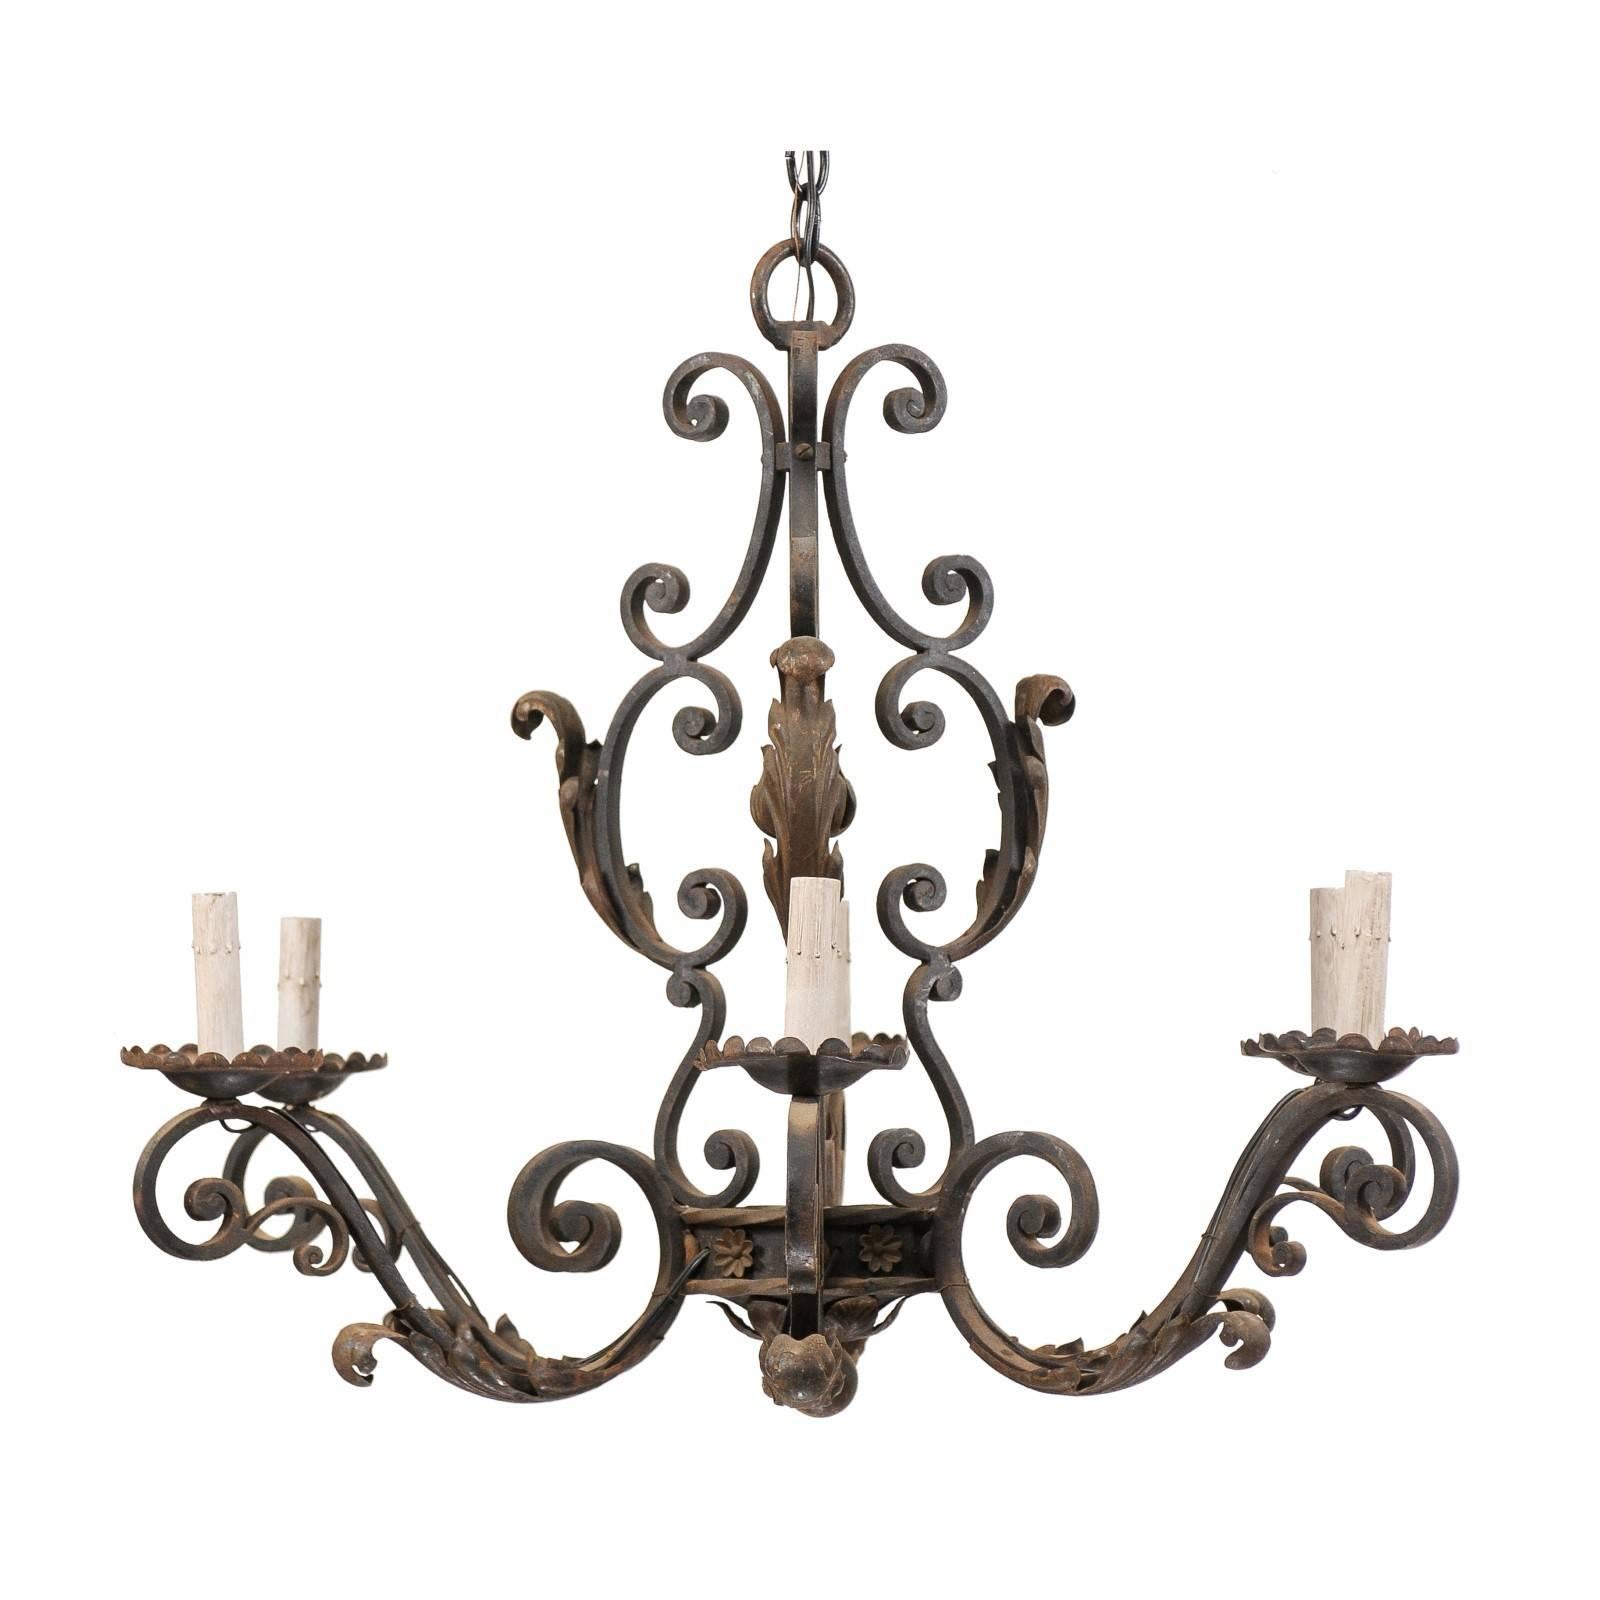 French Mid-20th Century Scrolled Iron Chandelier with Six Lights